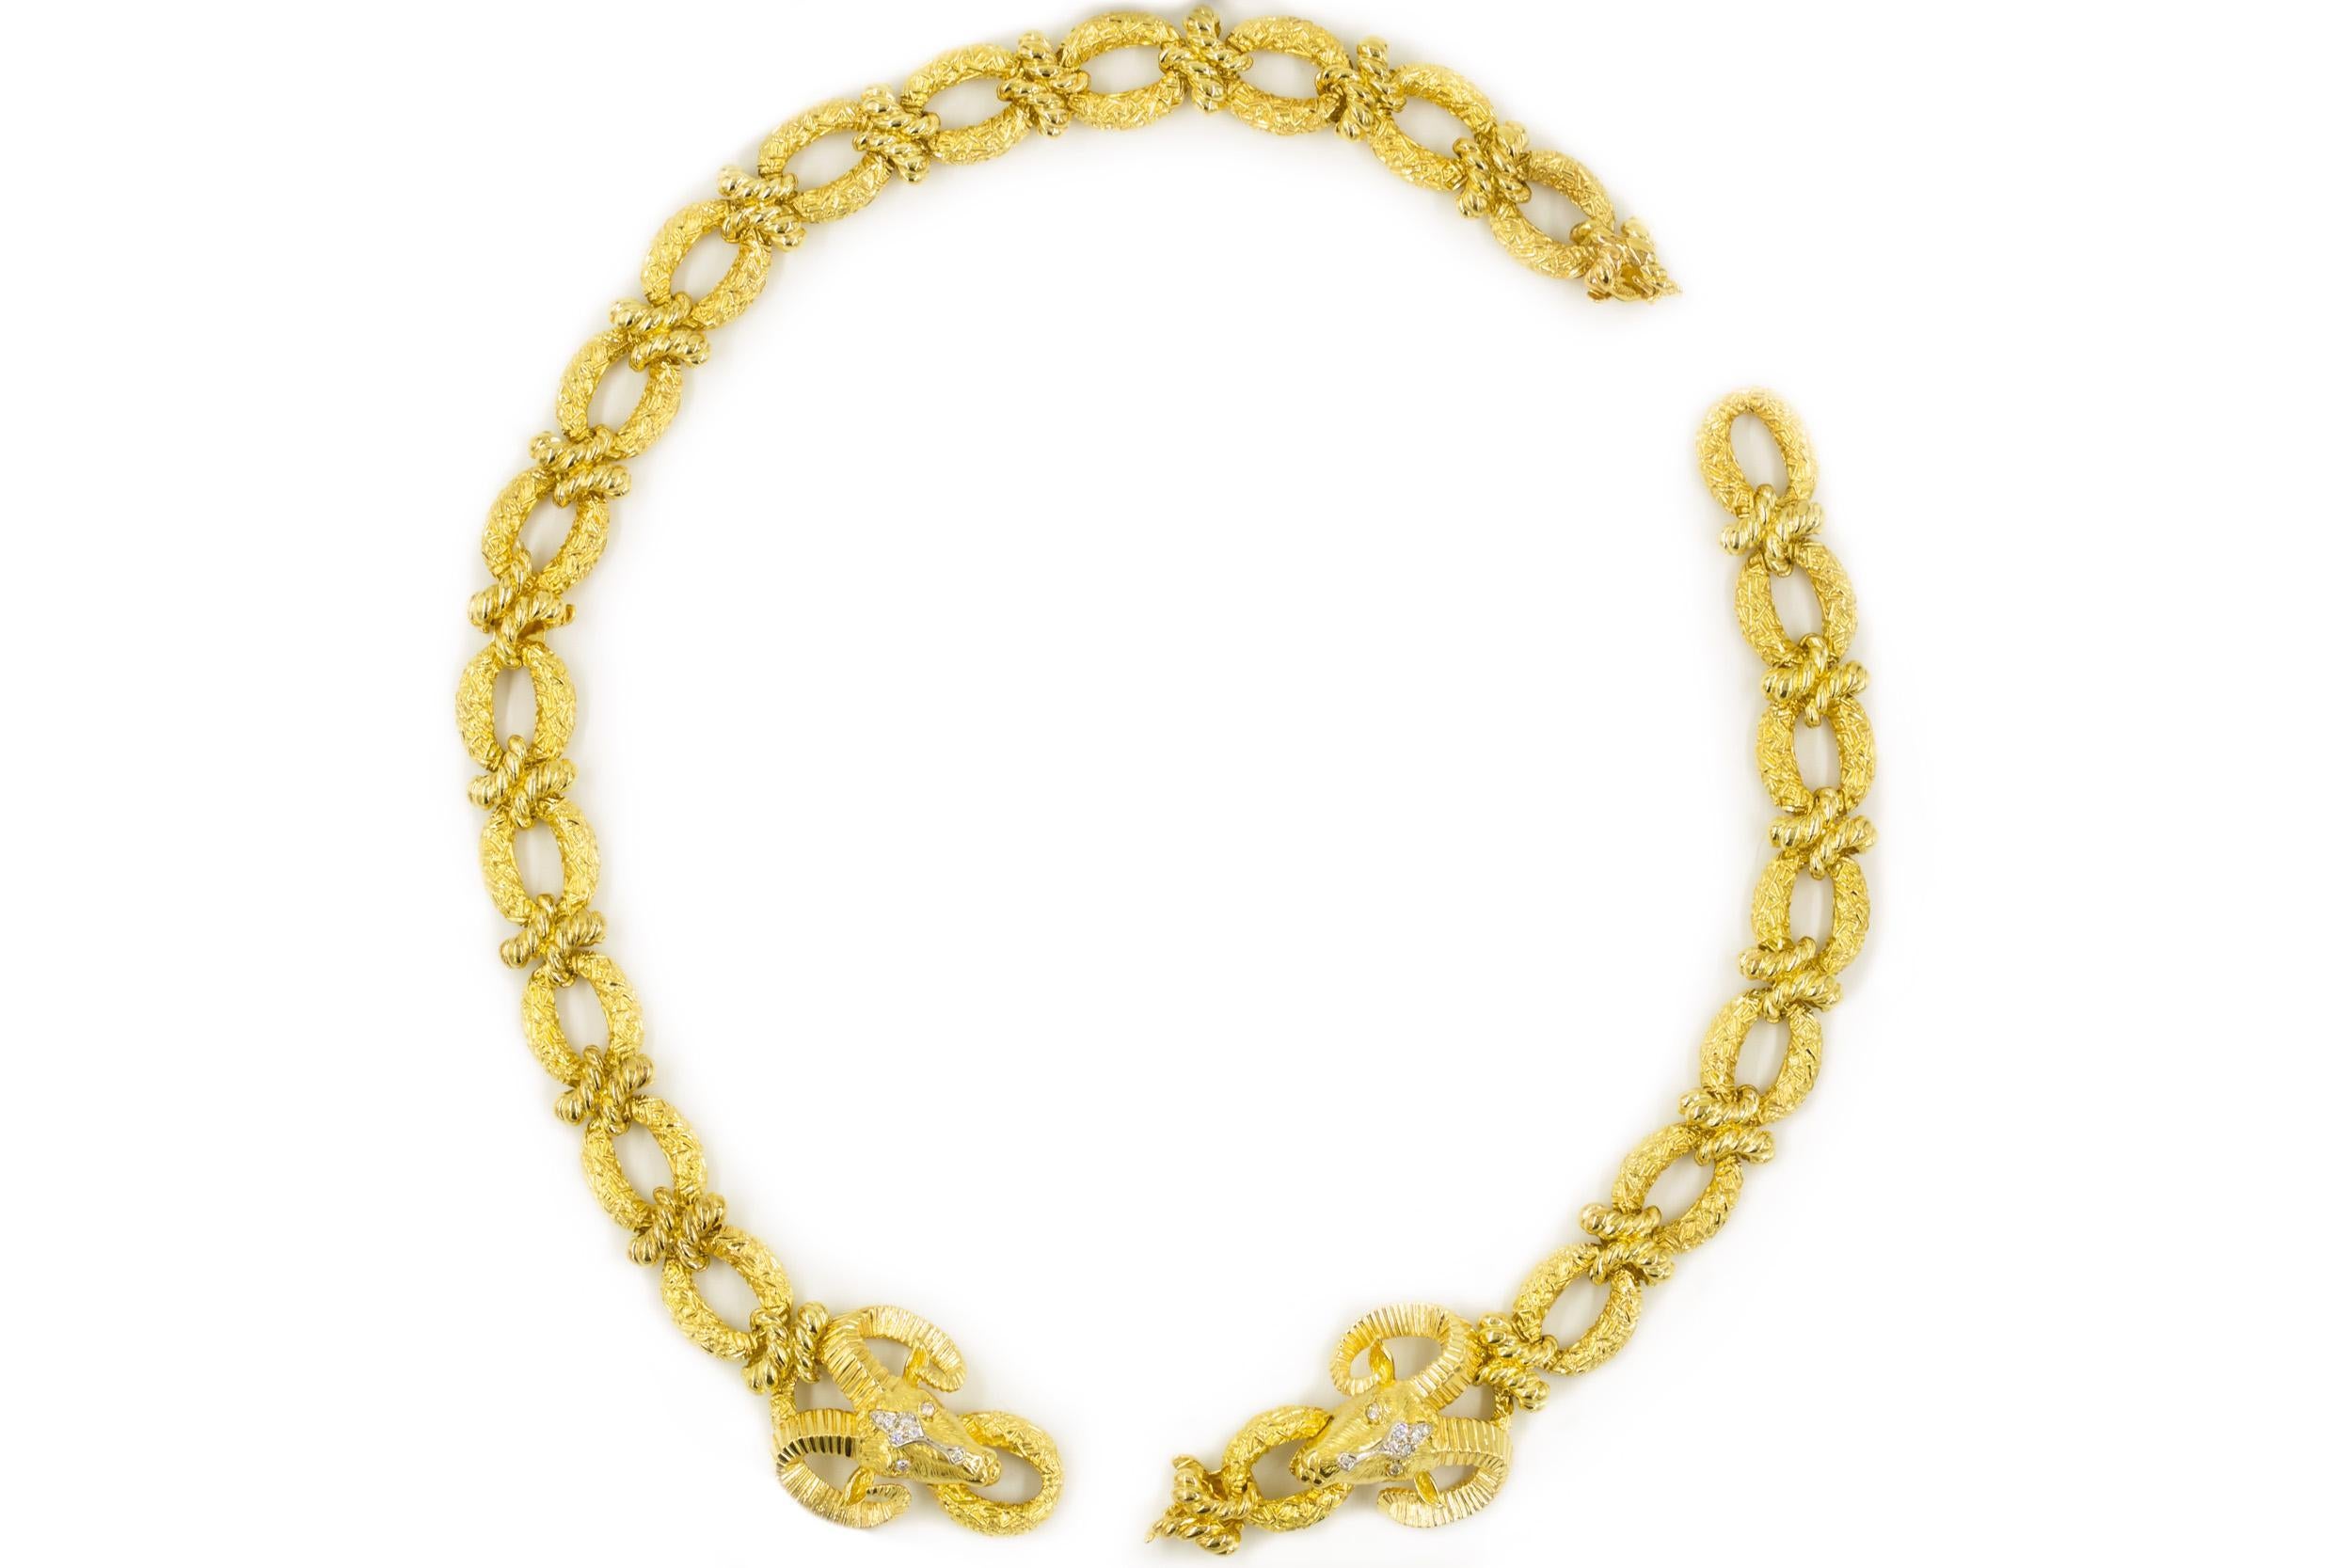 An incredibly substantial work of art crafted of 250.7 grams of 14k yellow gold and inset with 24 brilliant full cut diamonds, this intricately cast and finished work was designed by La Triomphe in the 1970s and remains in impeccable original